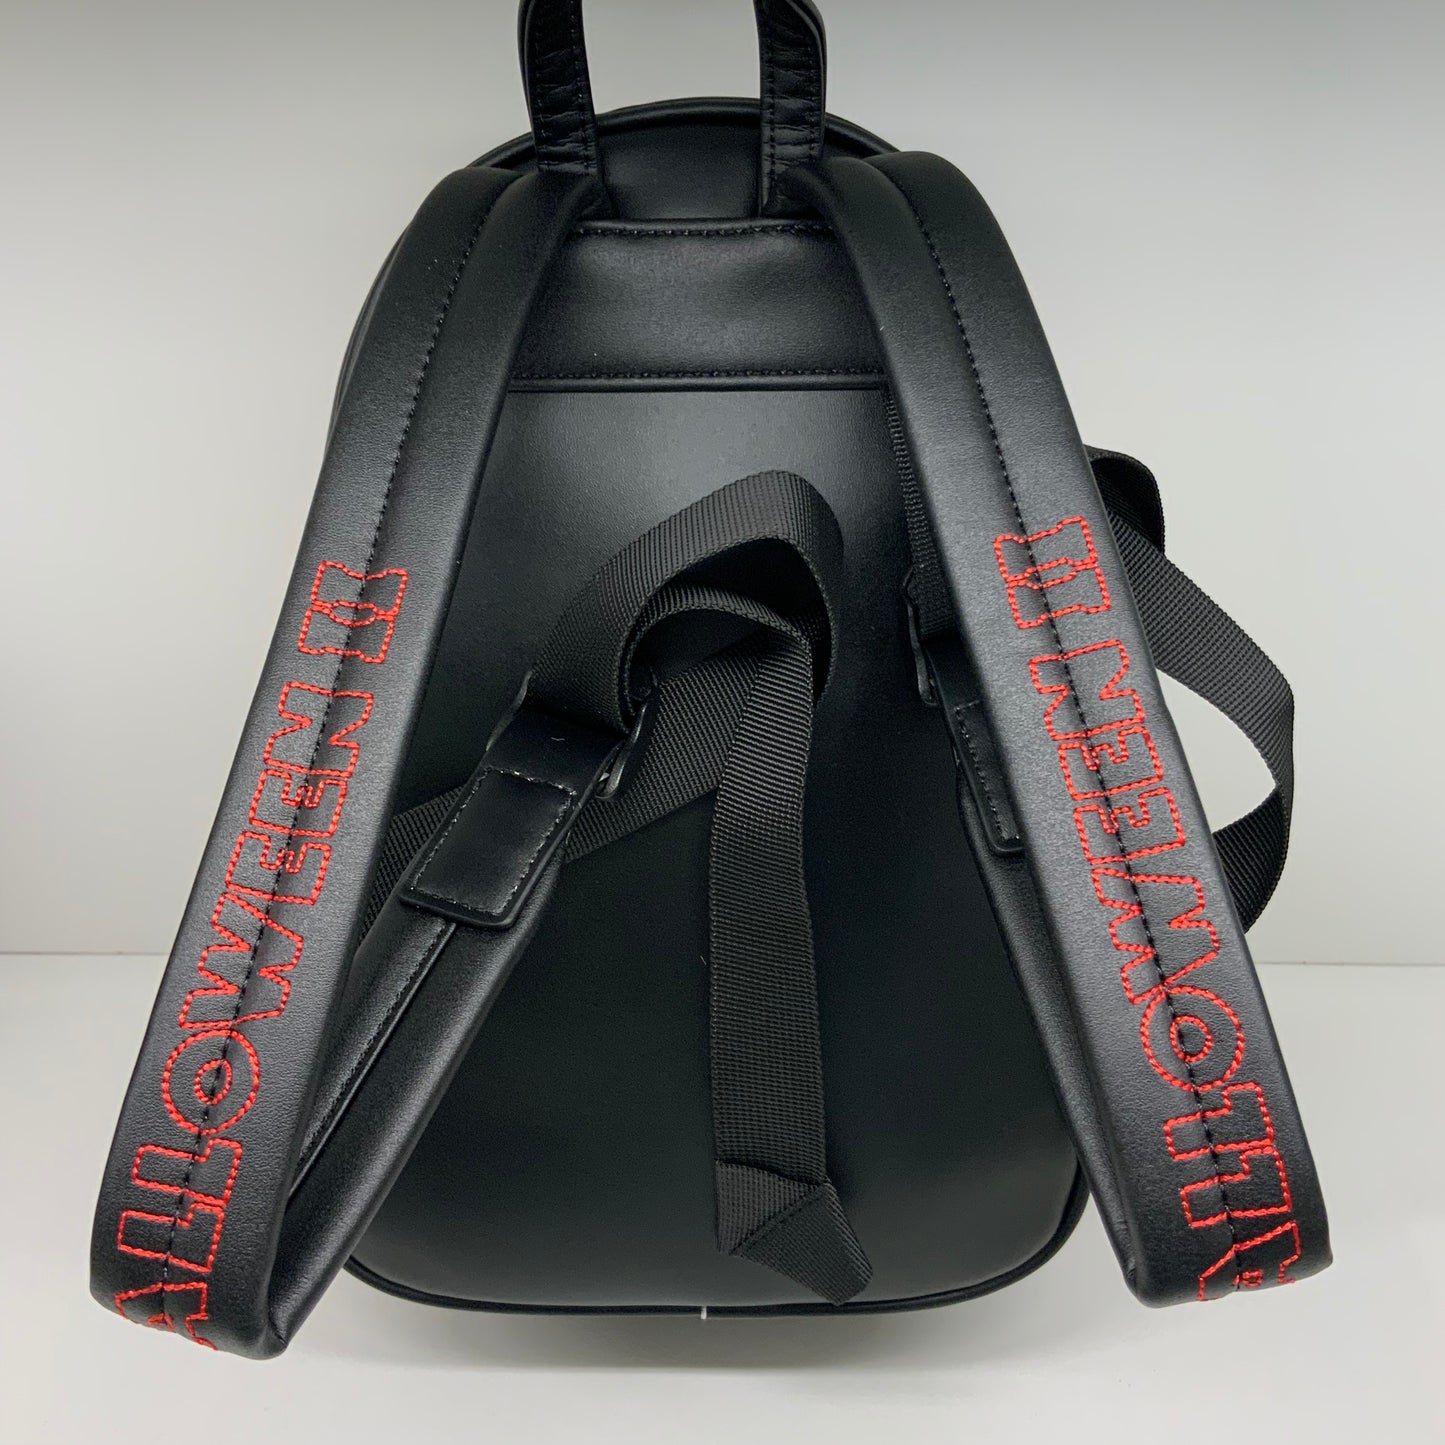 Michael Myers Monster Head Backpack – Wicked Misfit